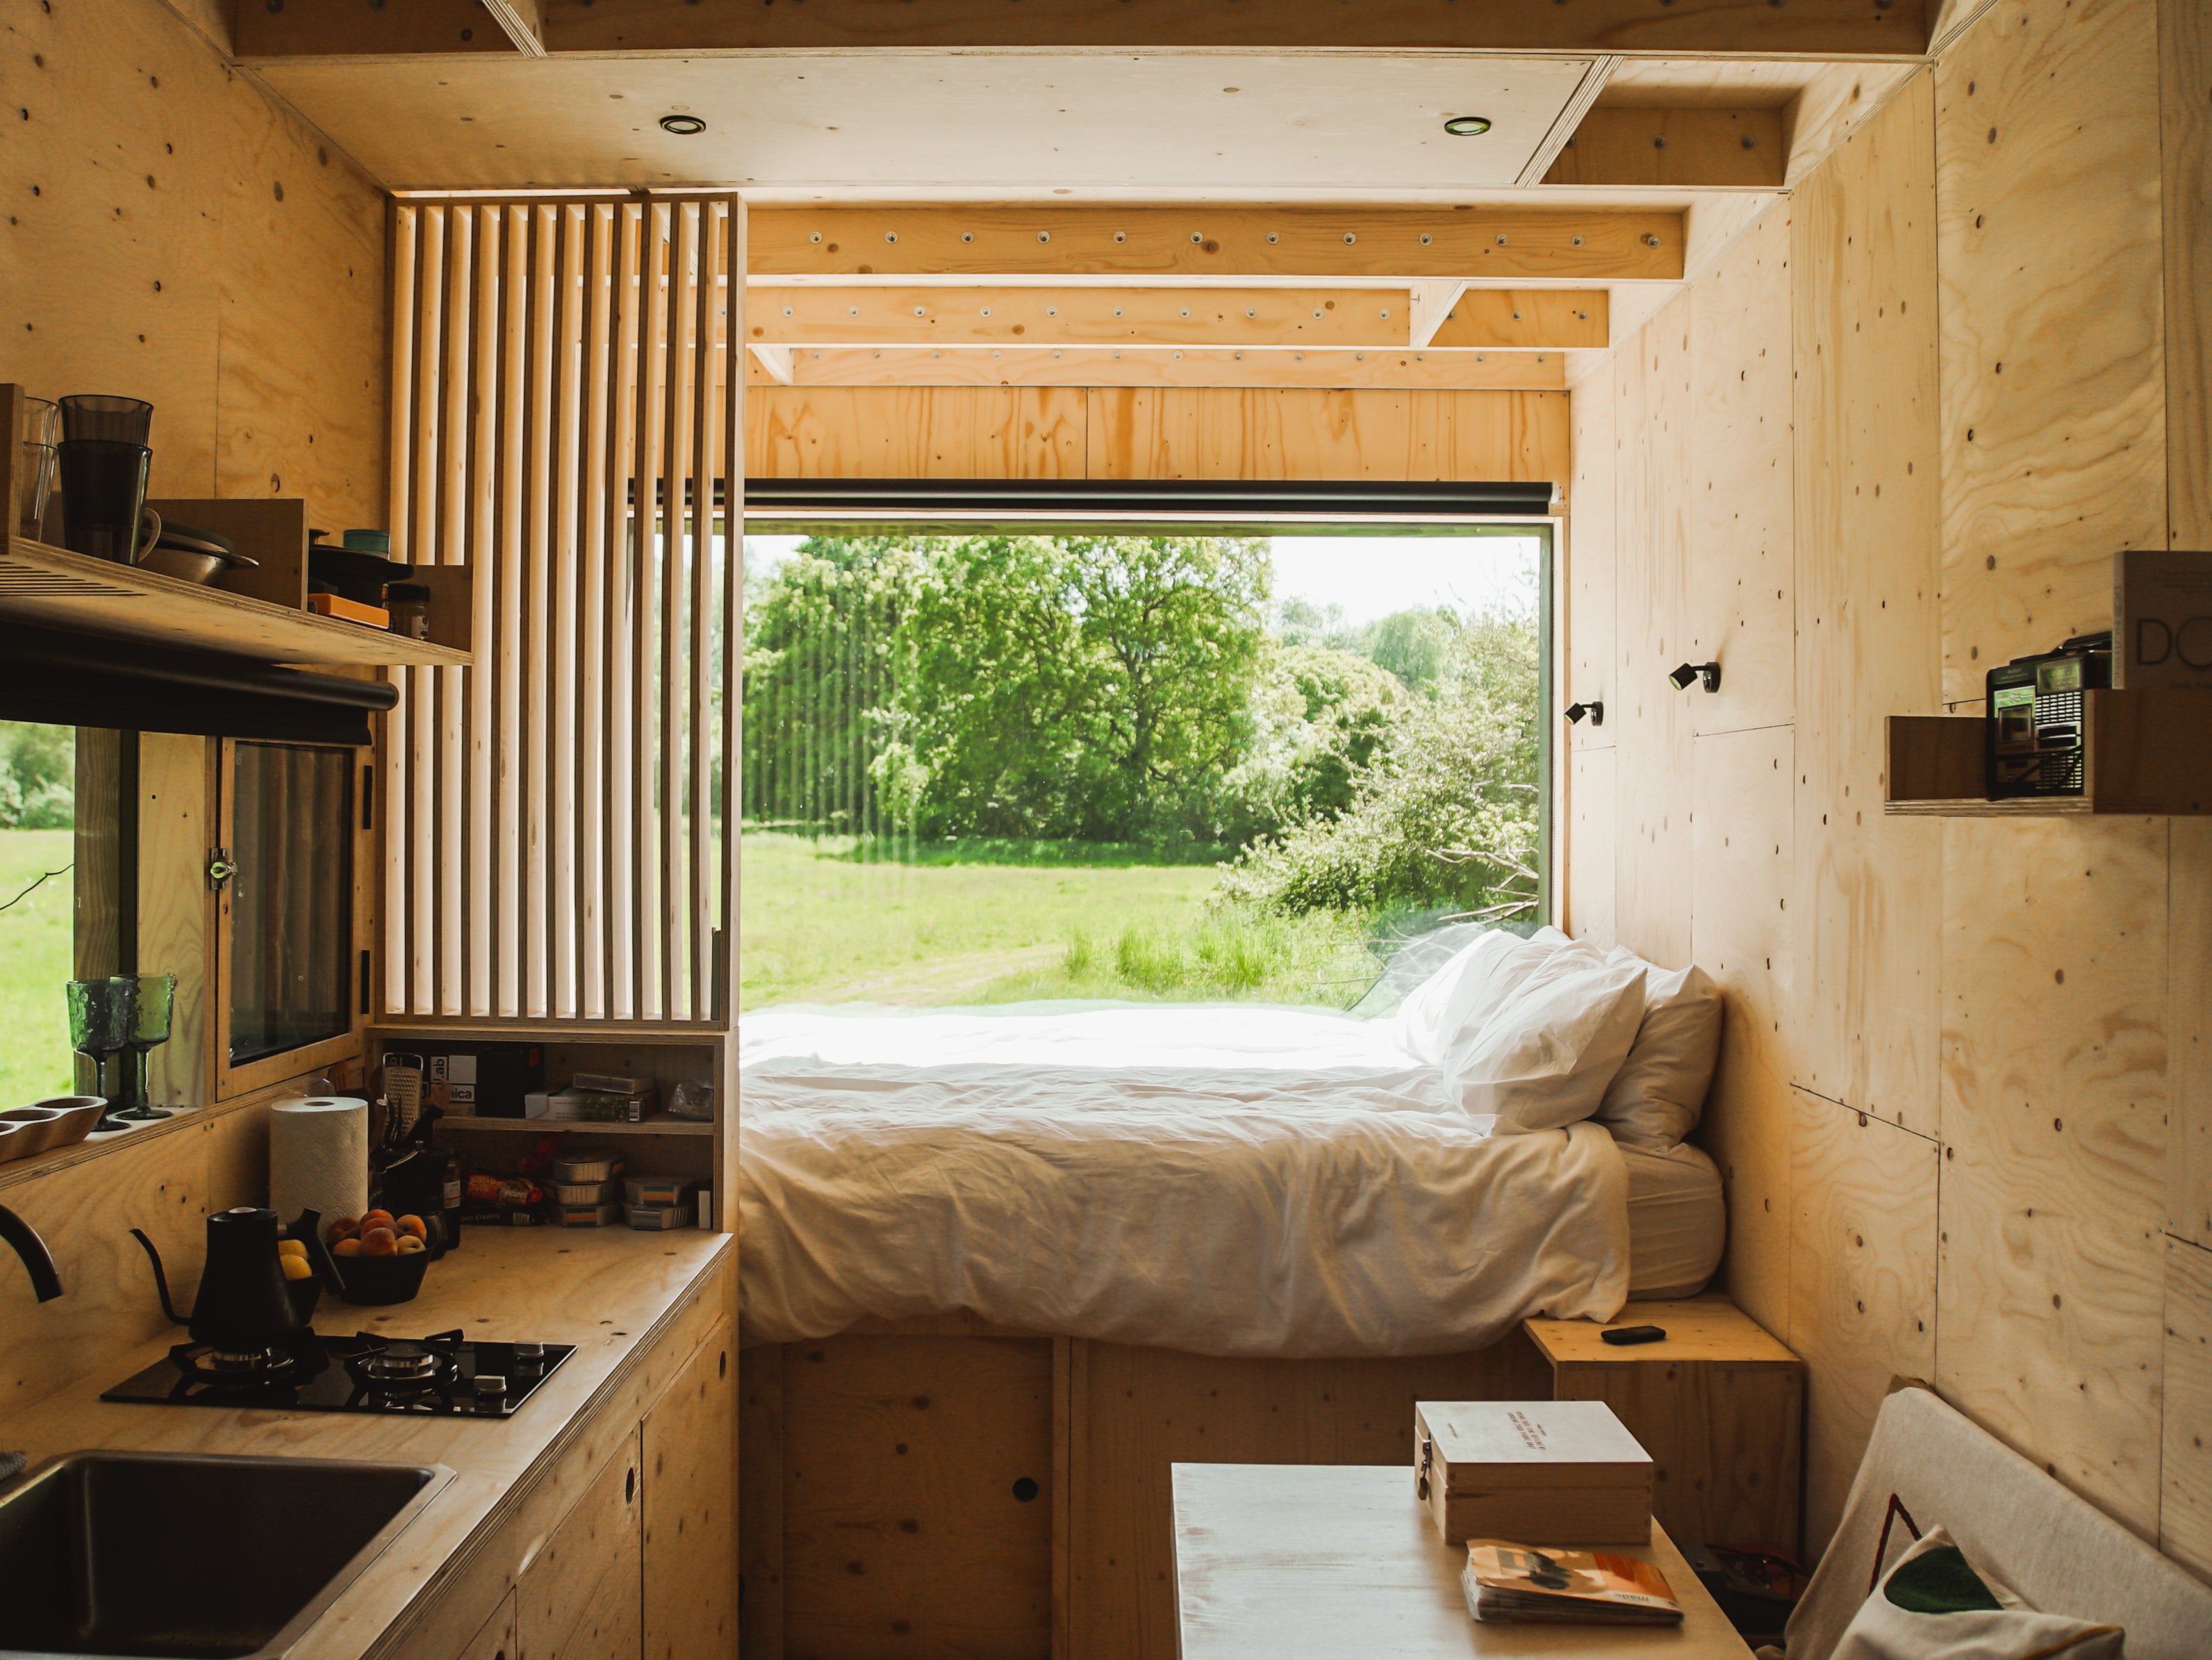 An Unplugged cabin offers simple charm